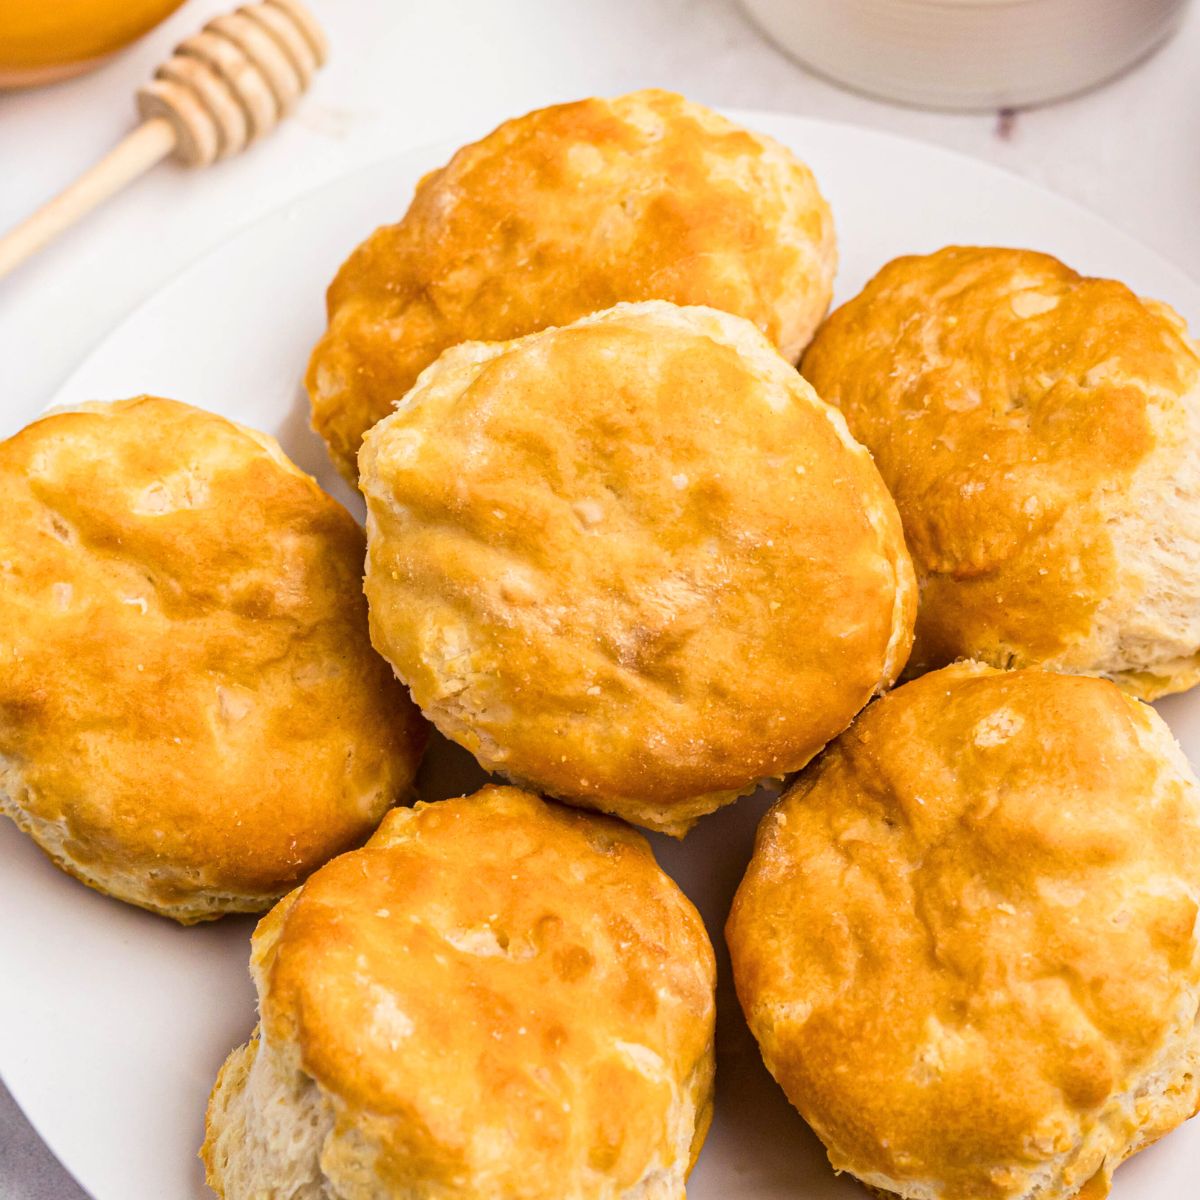 Golden biscuits on a white small plate in front of butter and honey.